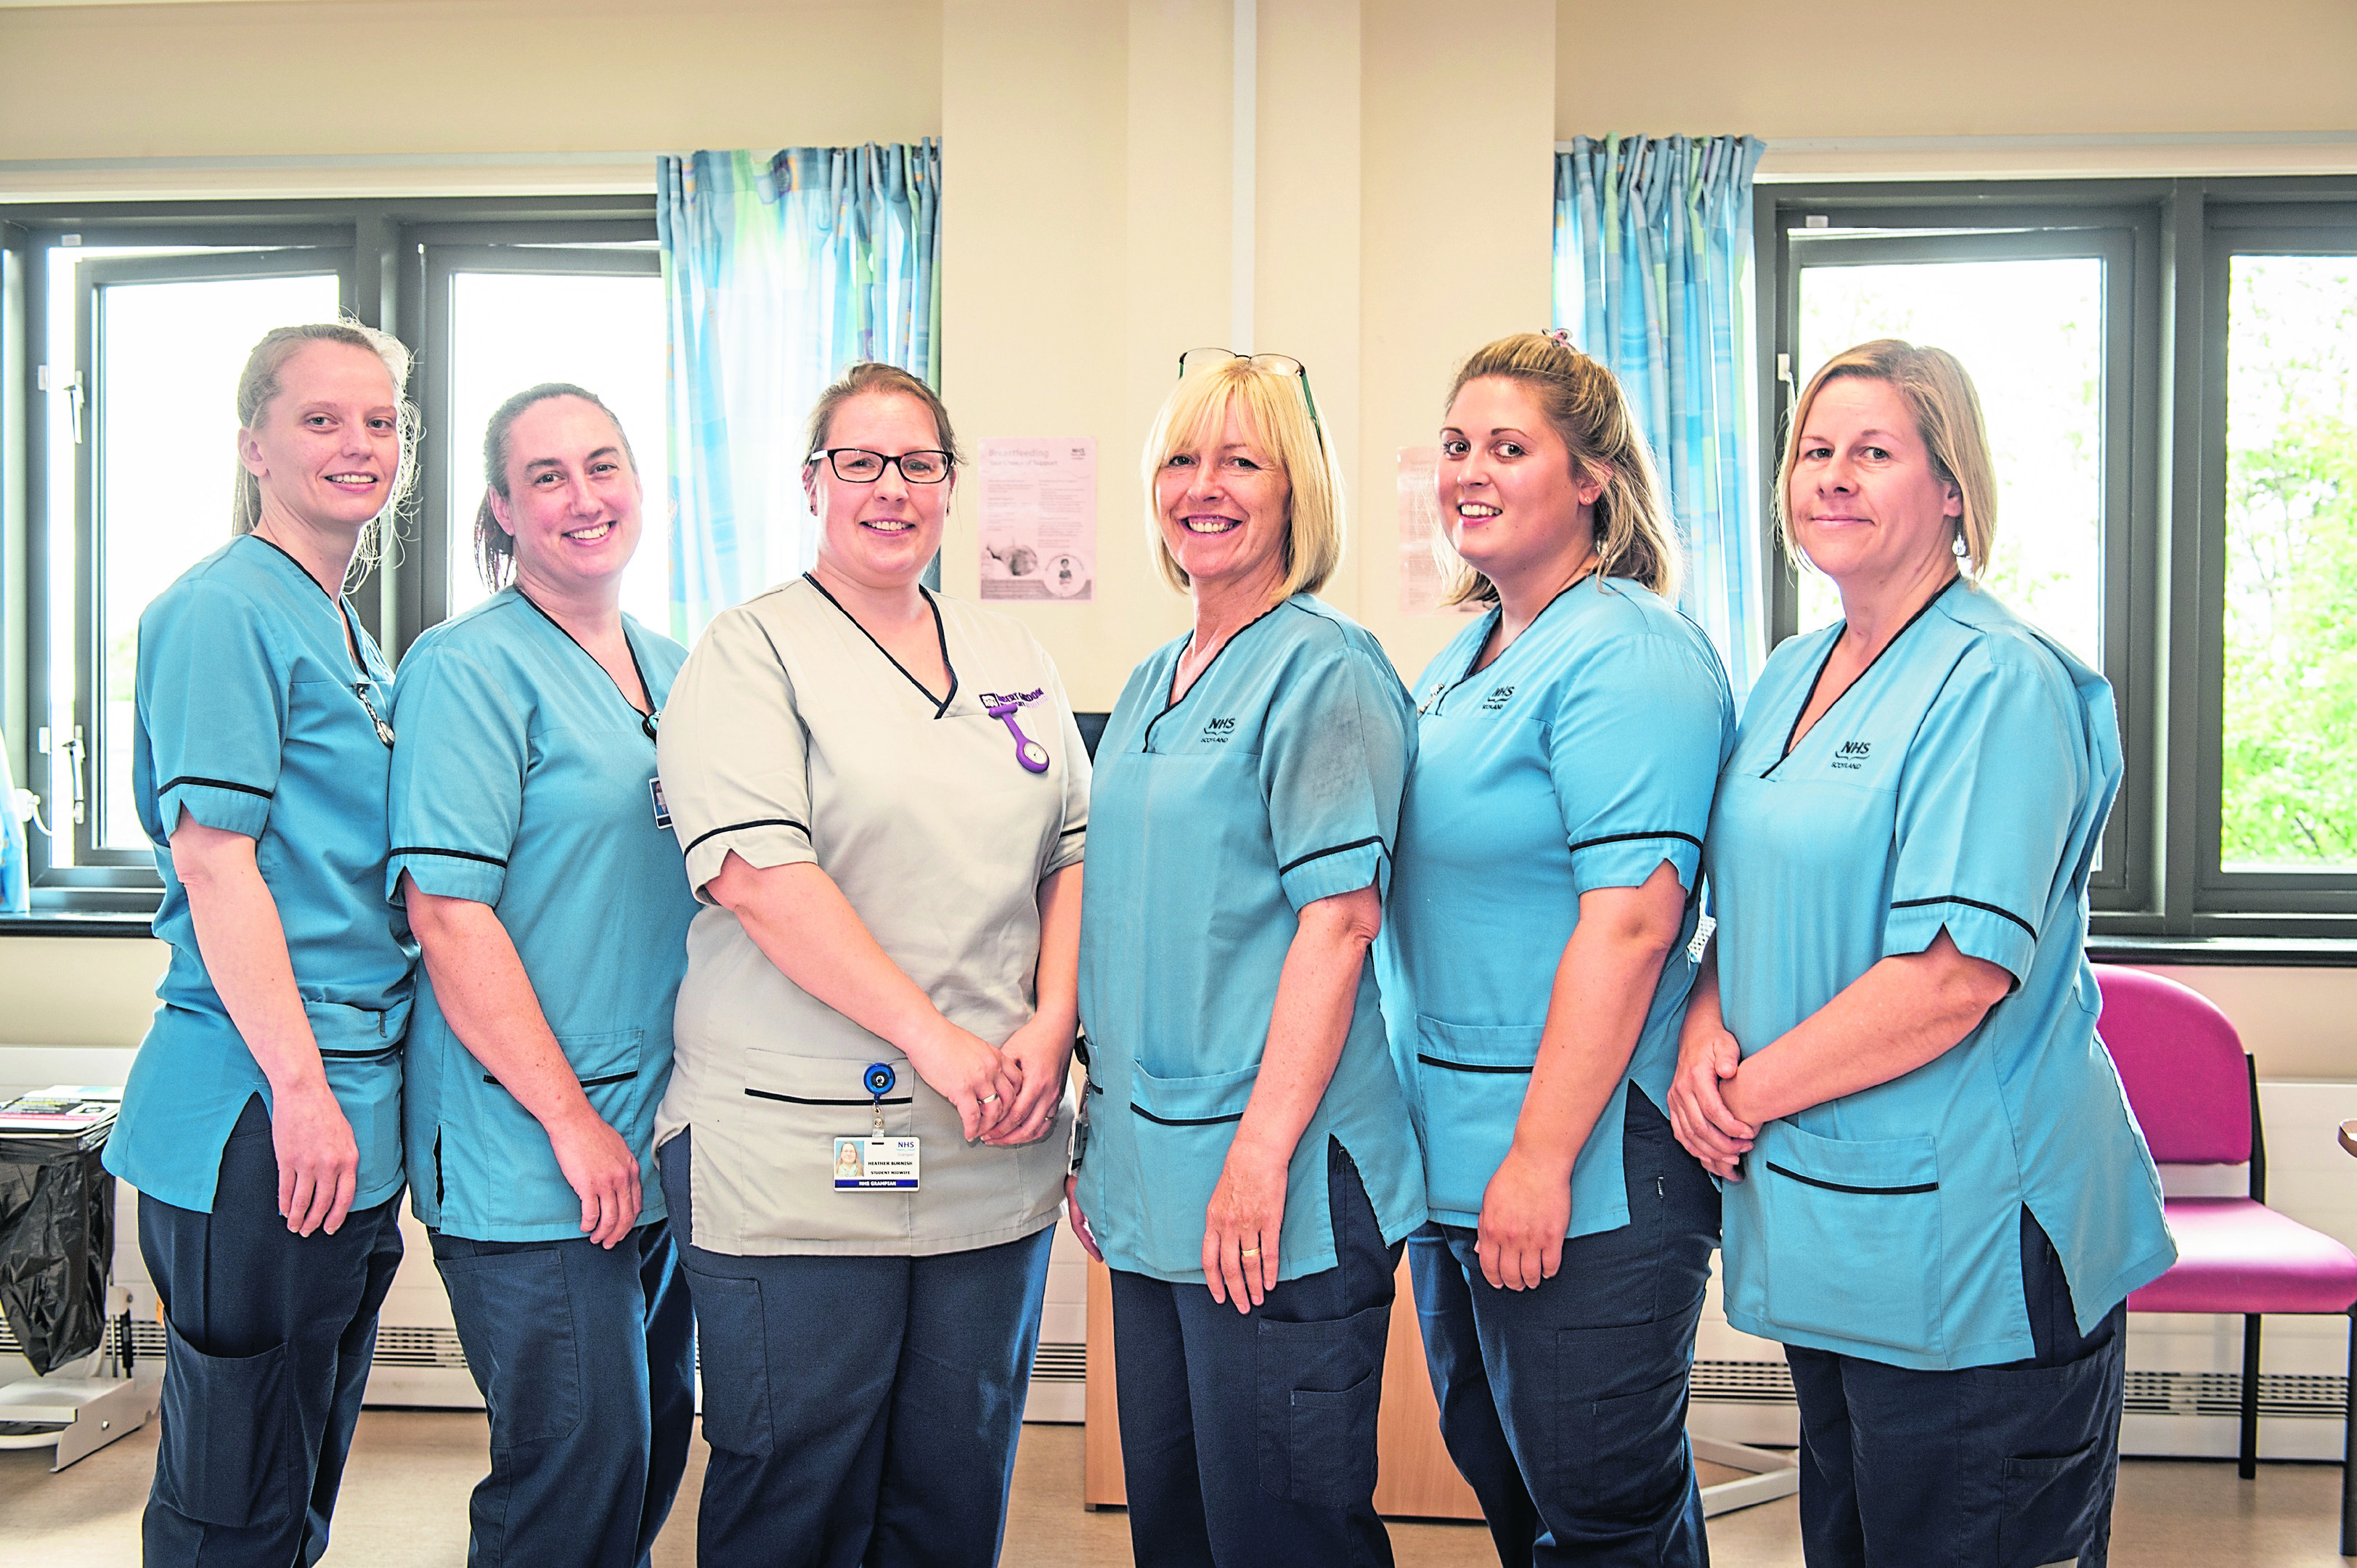 Midwives at Dr Grays Hospital in Elgin, which has had its maternity ward downgraded in a staffing crisis.